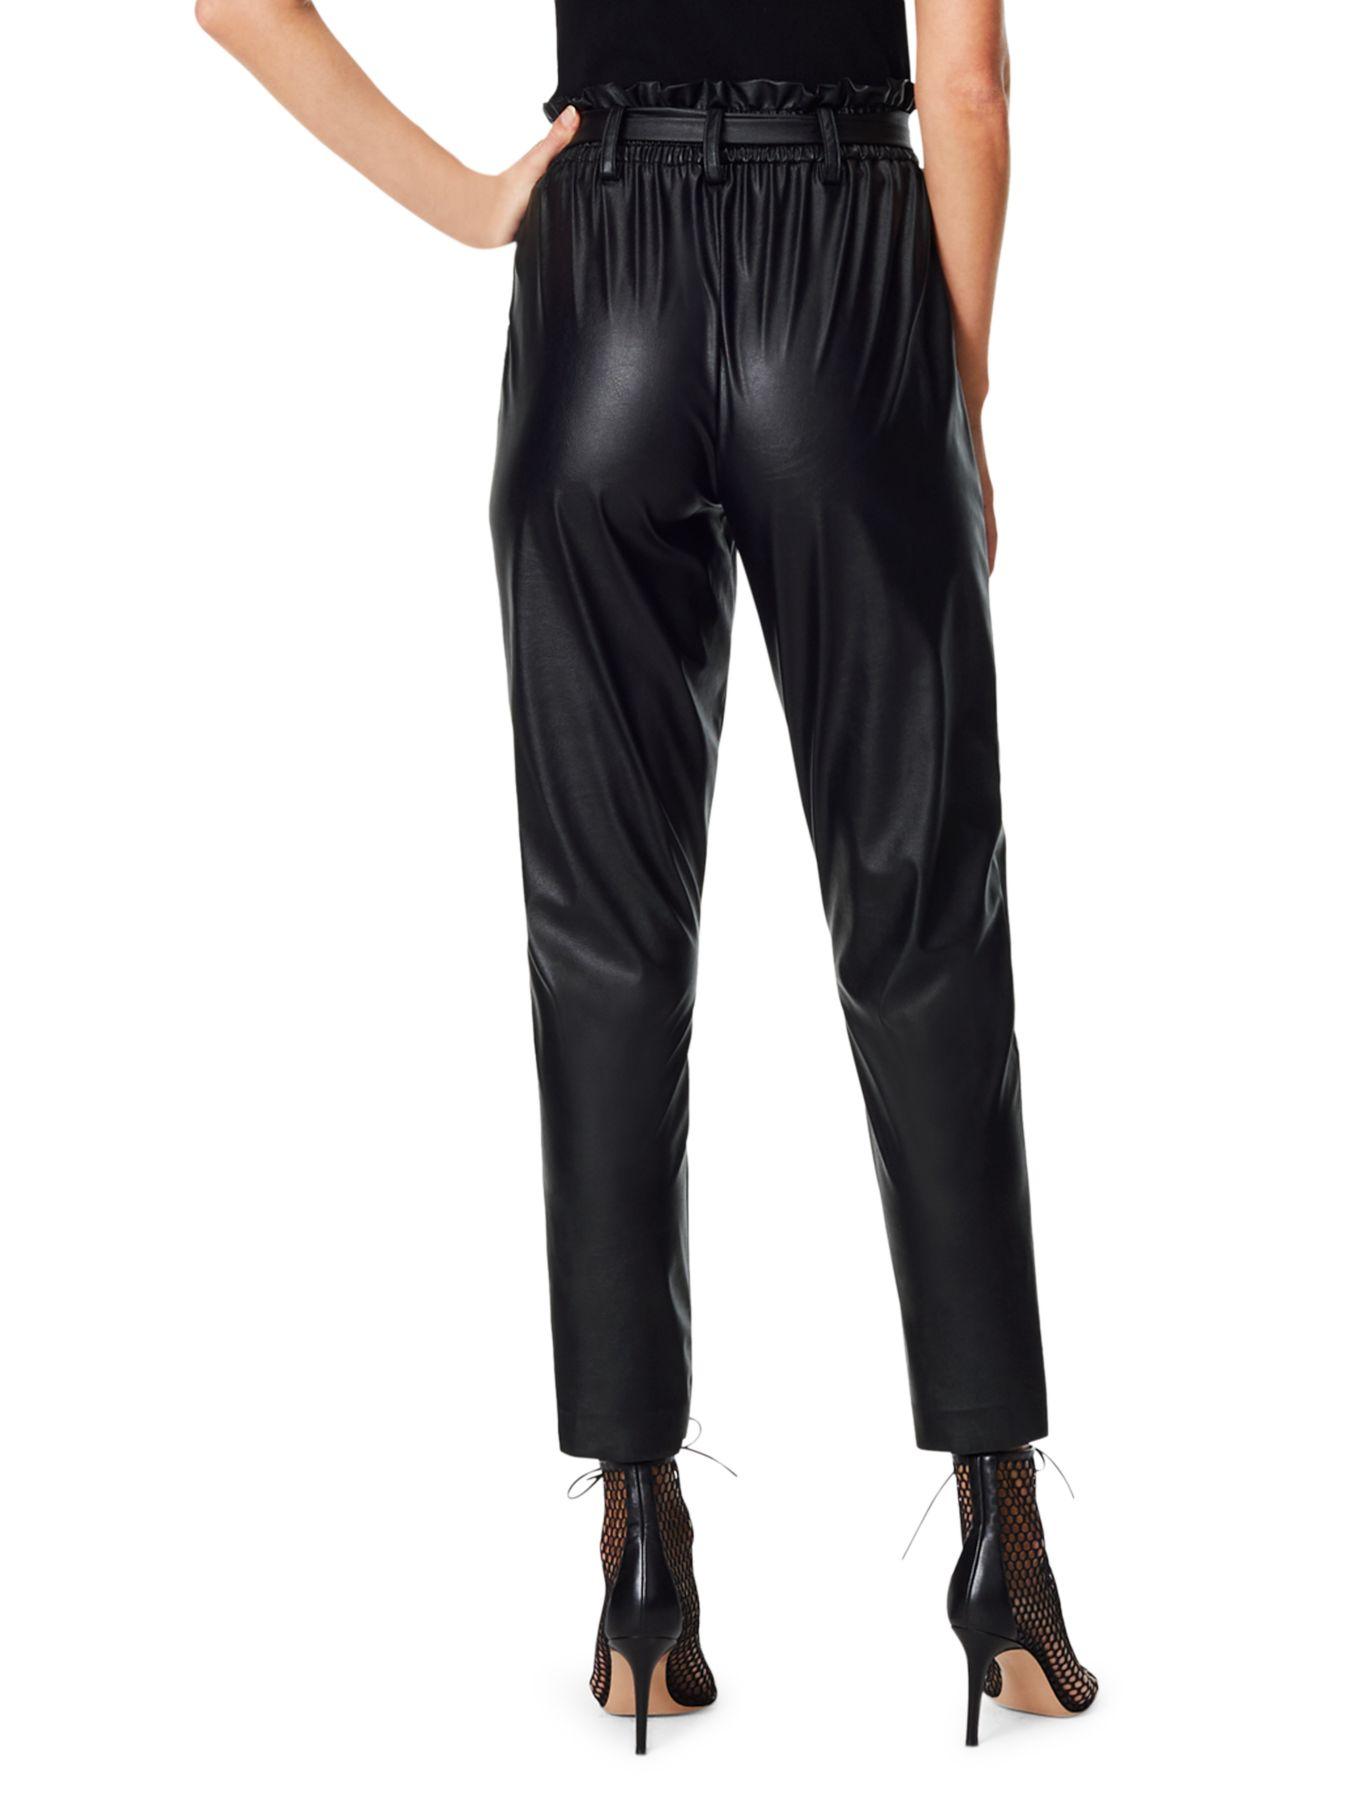 Ramy Brook Marty Faux-leather Pants in Black - Lyst